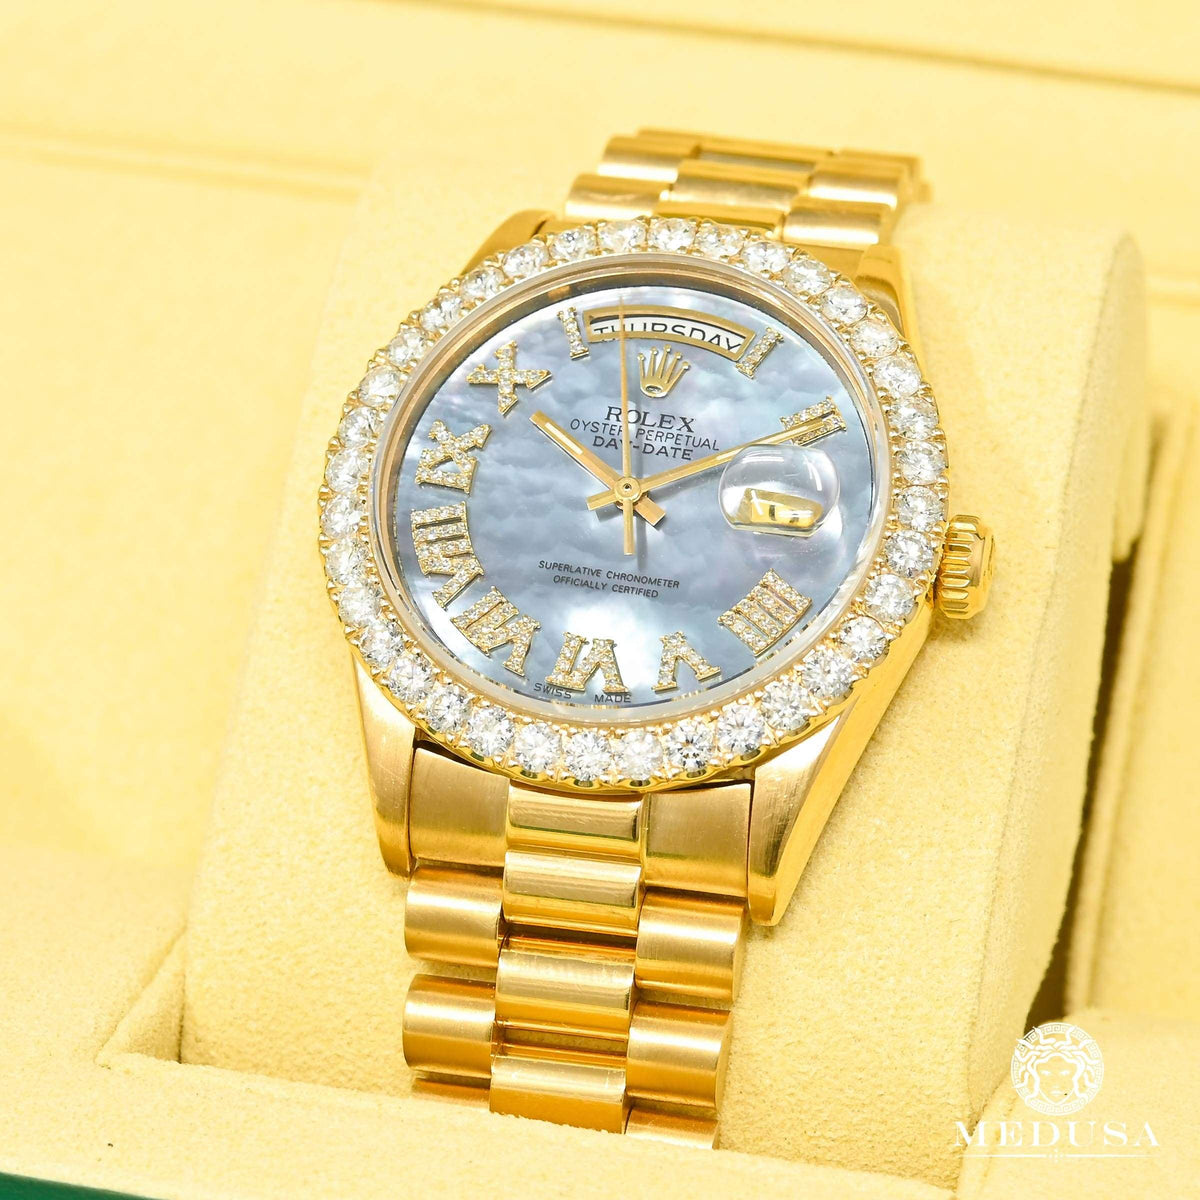 Montre Rolex | Montre Homme Rolex Day-Date 36mm - Cyan ’’Mother Of Pearl’’ Romain / Or Jaune